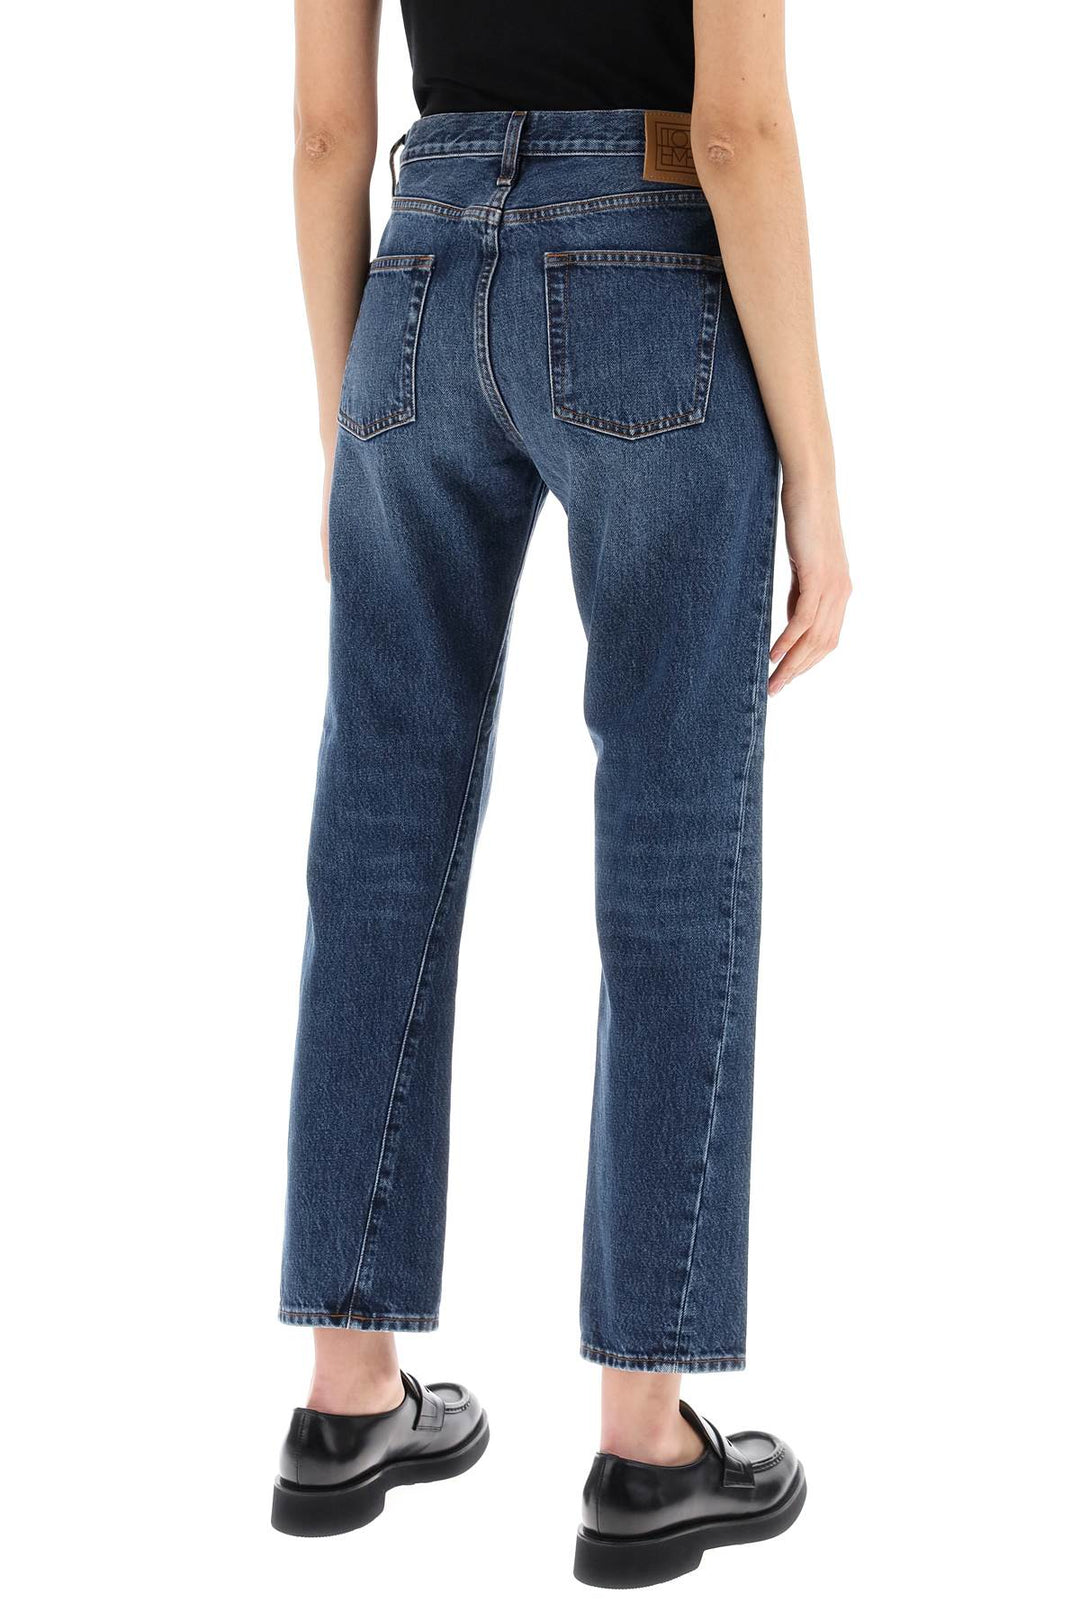 Toteme Twisted Seam Straight Jeans   Blue